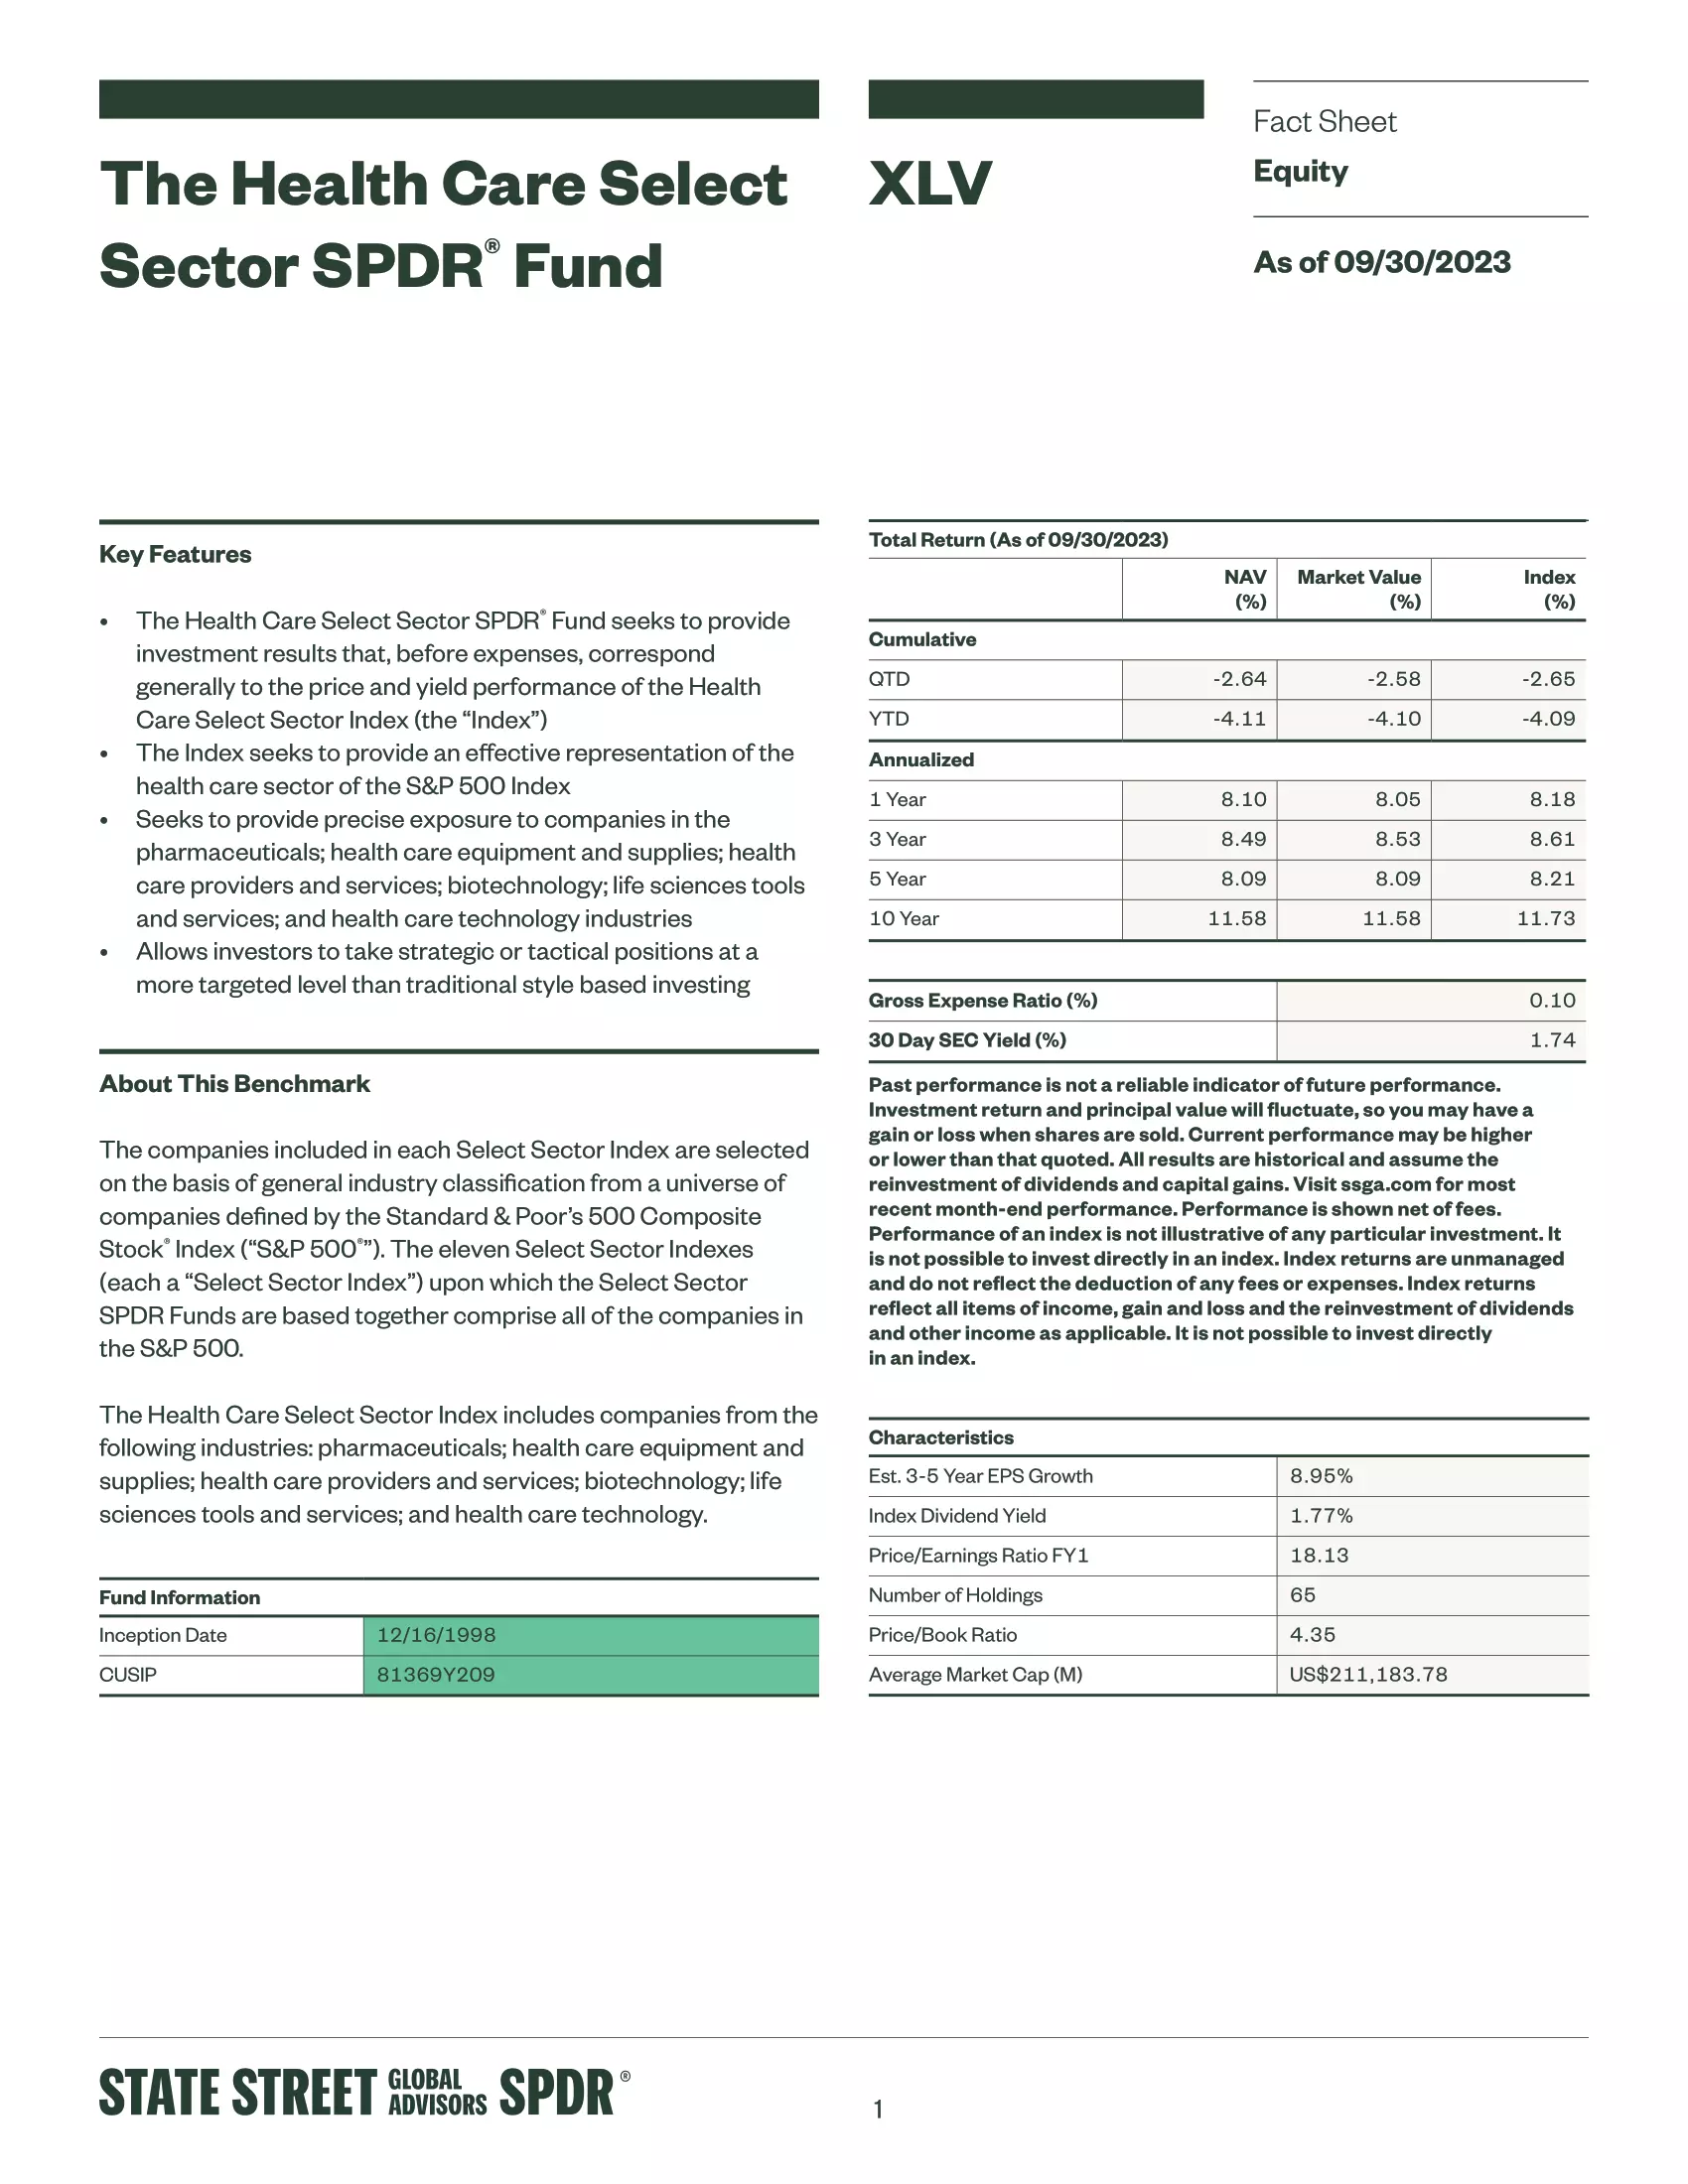 XLV: Health Care Select Sector SPDR Fund